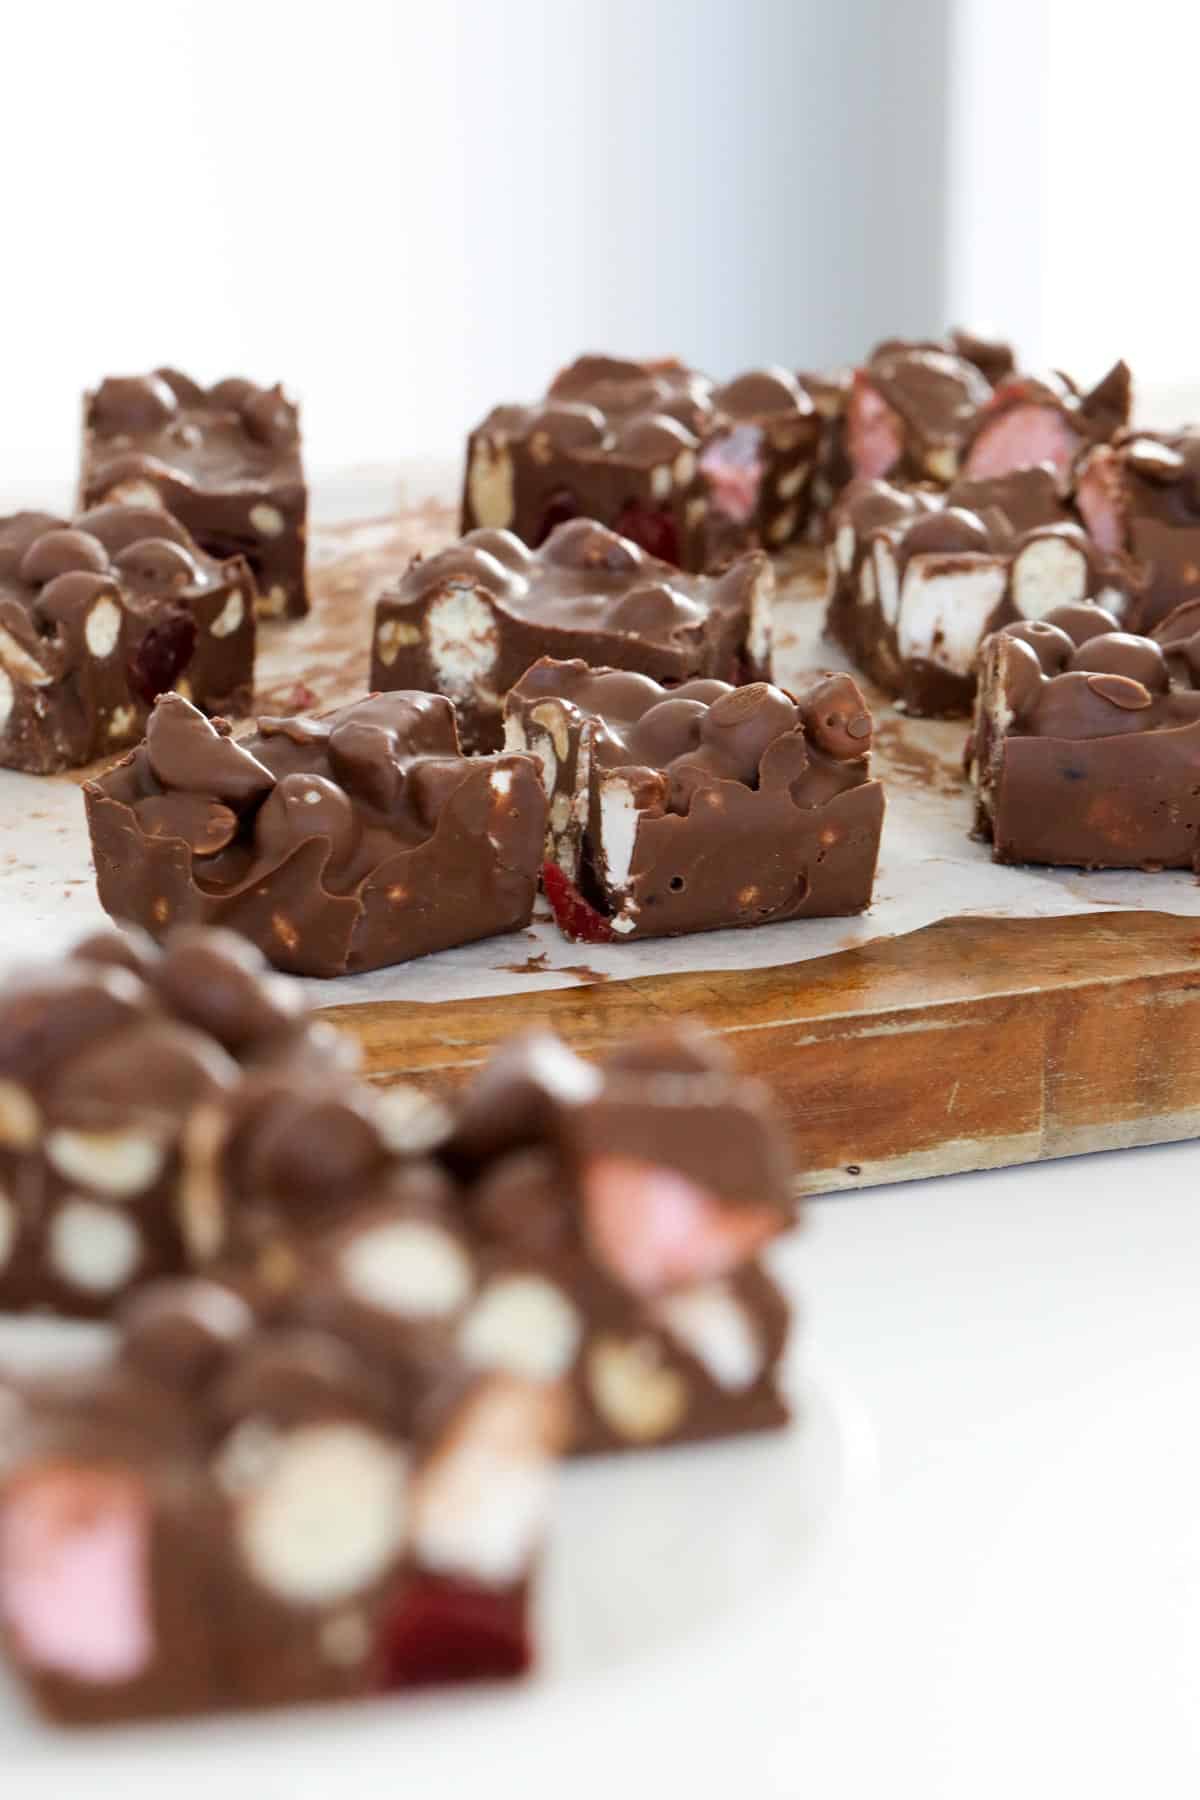 Pieces of chocolate rocky road on a wooden board.